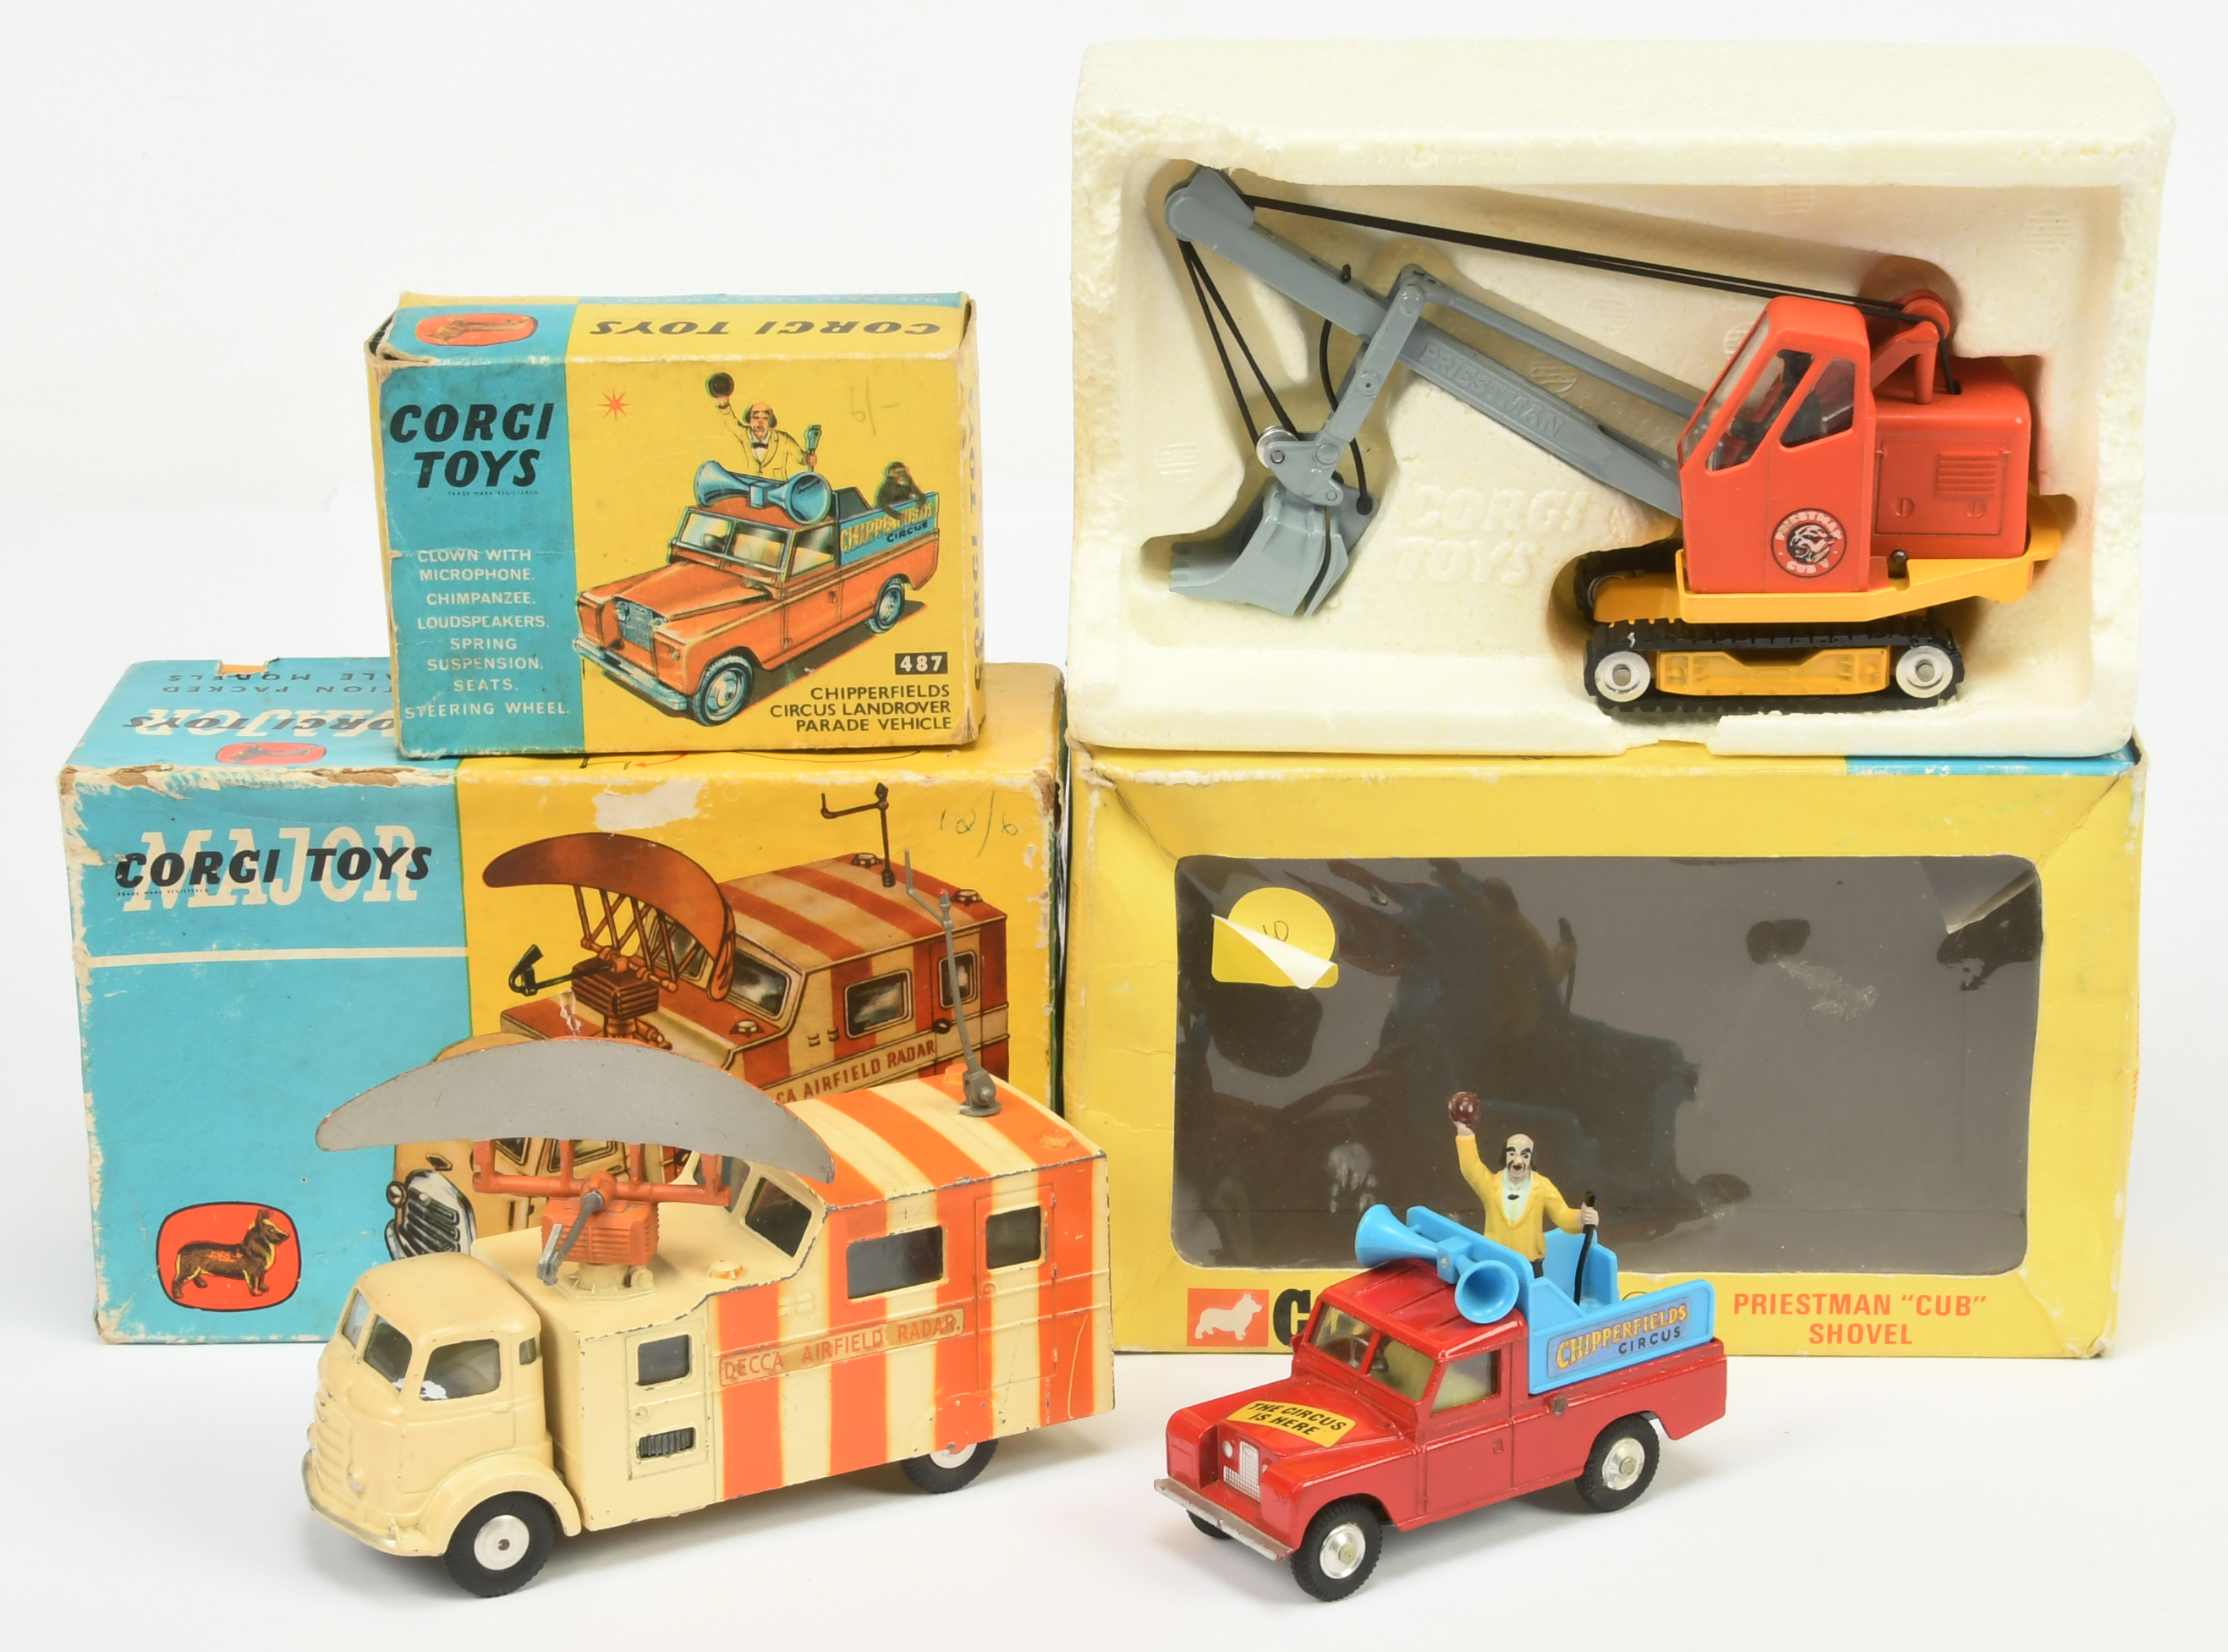 Corgi Toys Group Of 3 - (1) 487 Land Rover Parade Vehicle "Chipperfield's", (2) 1106 Decca Airfie...